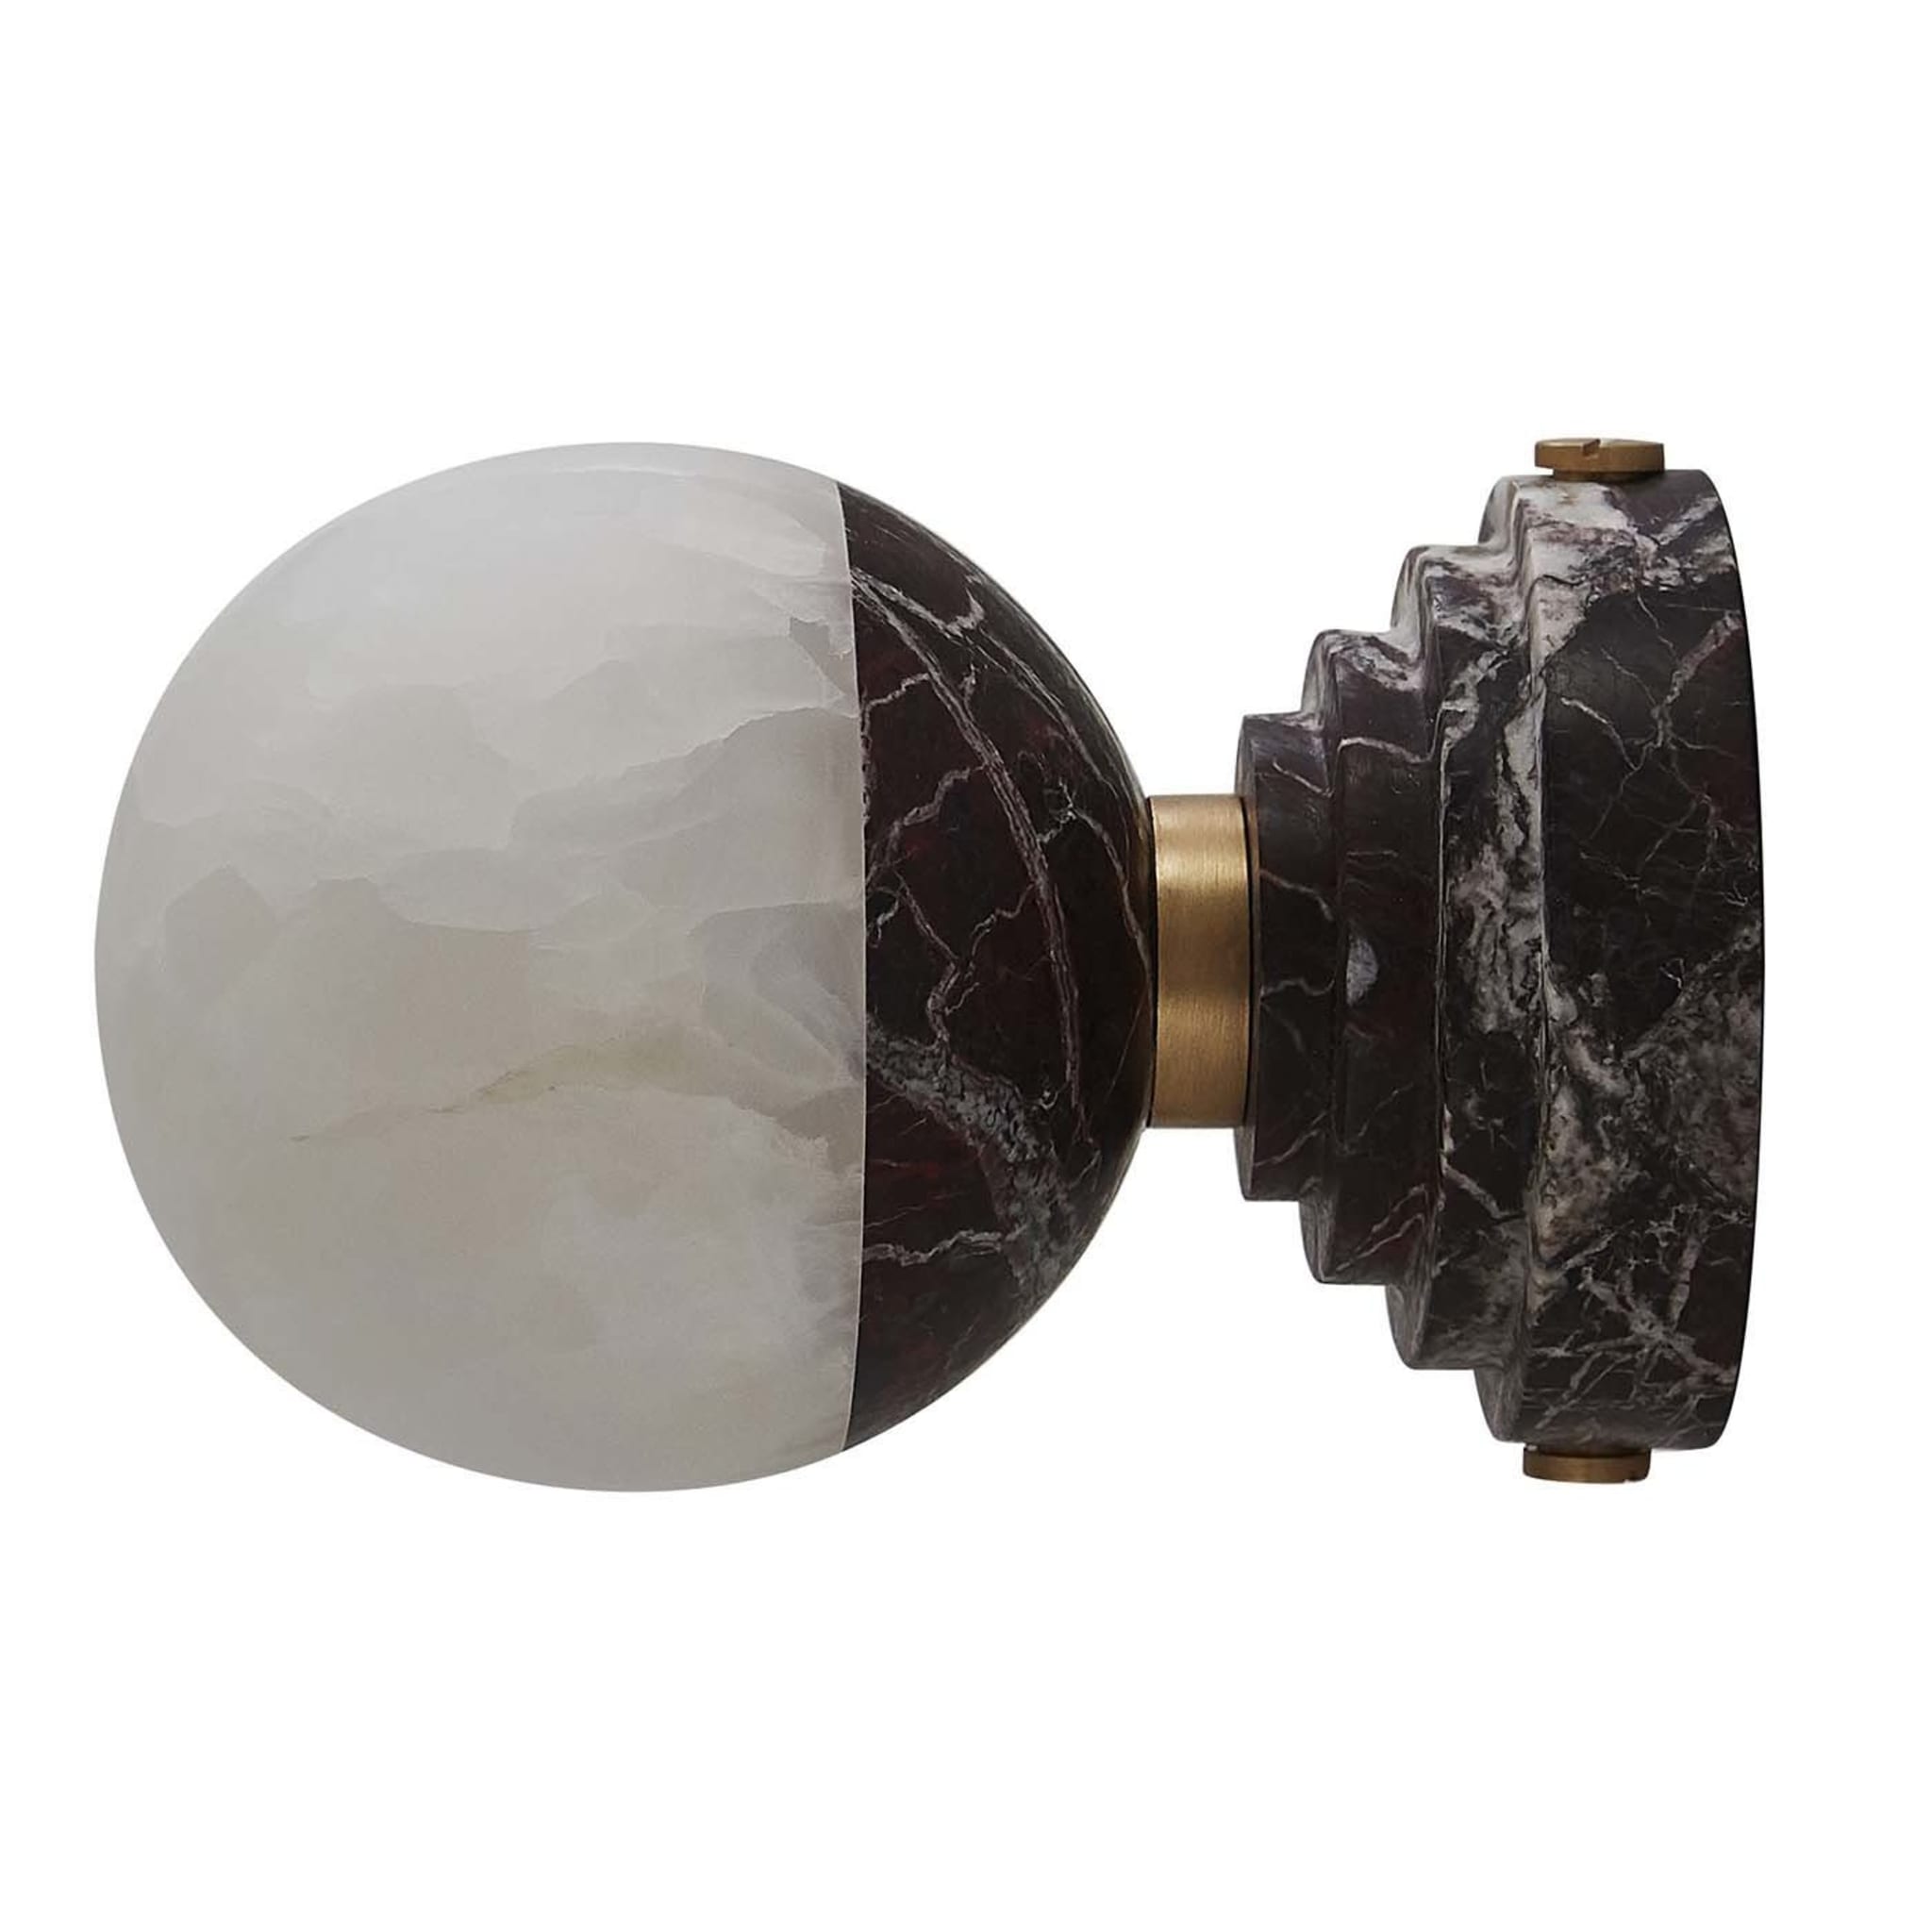 Lunar Sconce in Rosso Levanto Marble and Onyx  - Main view